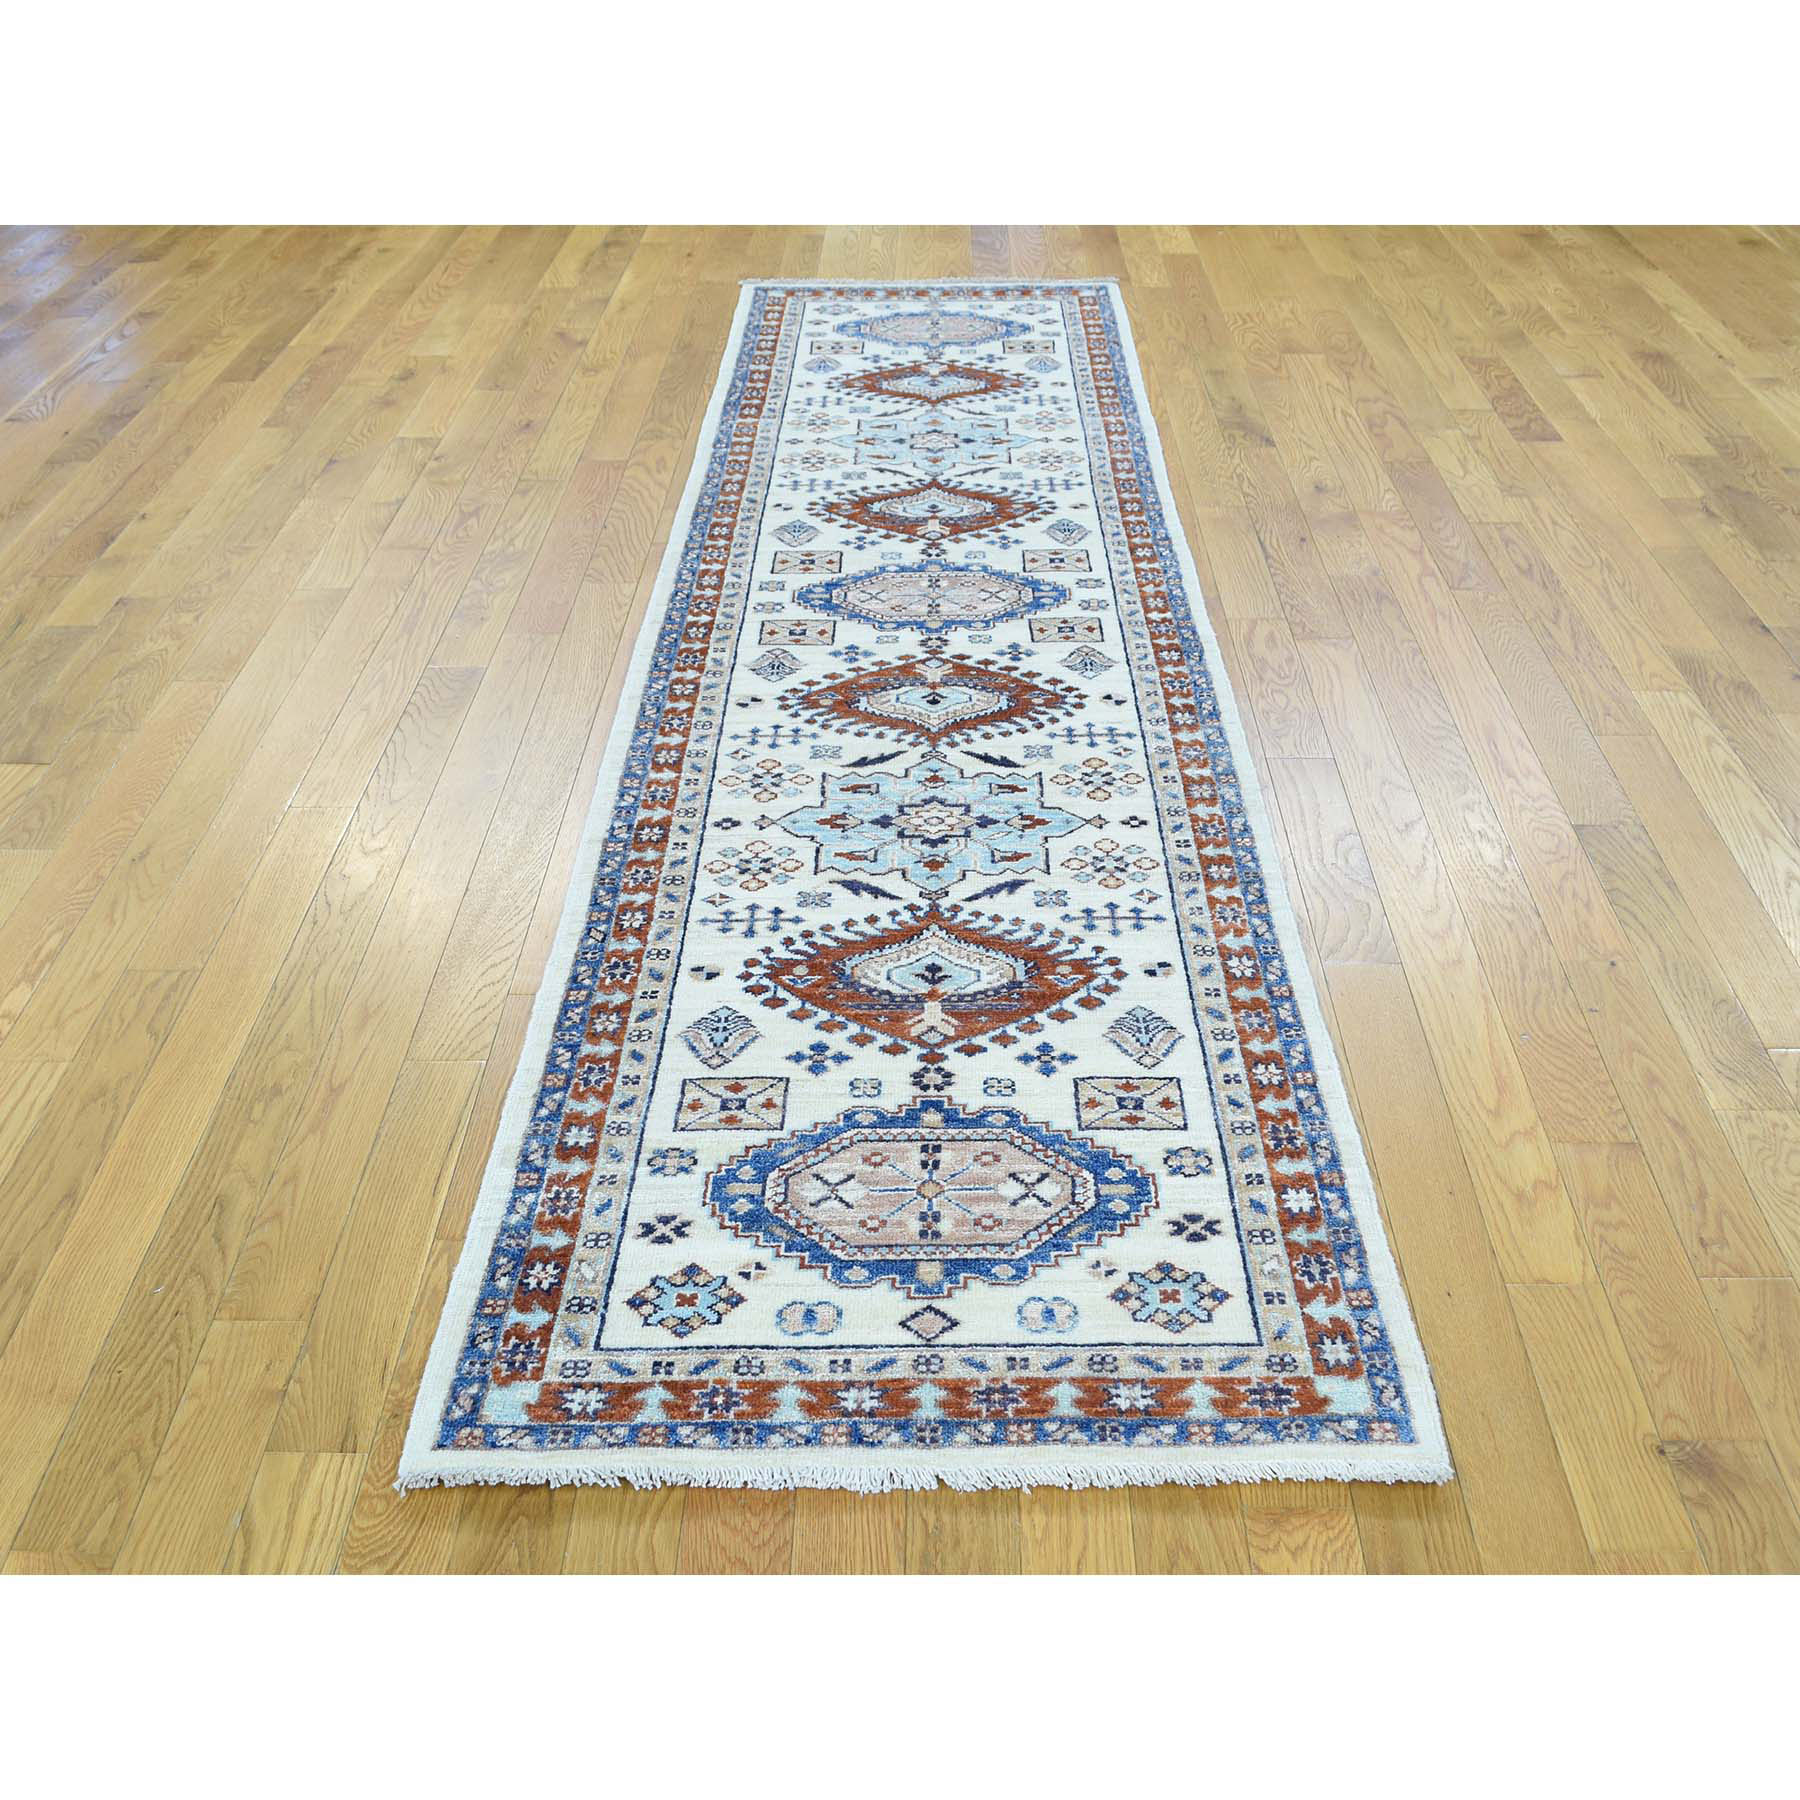 2-7 x9-10  On Clearance  Antiqued Karajeh Pure Wool Hand-Knotted Oriental Runner Rug 